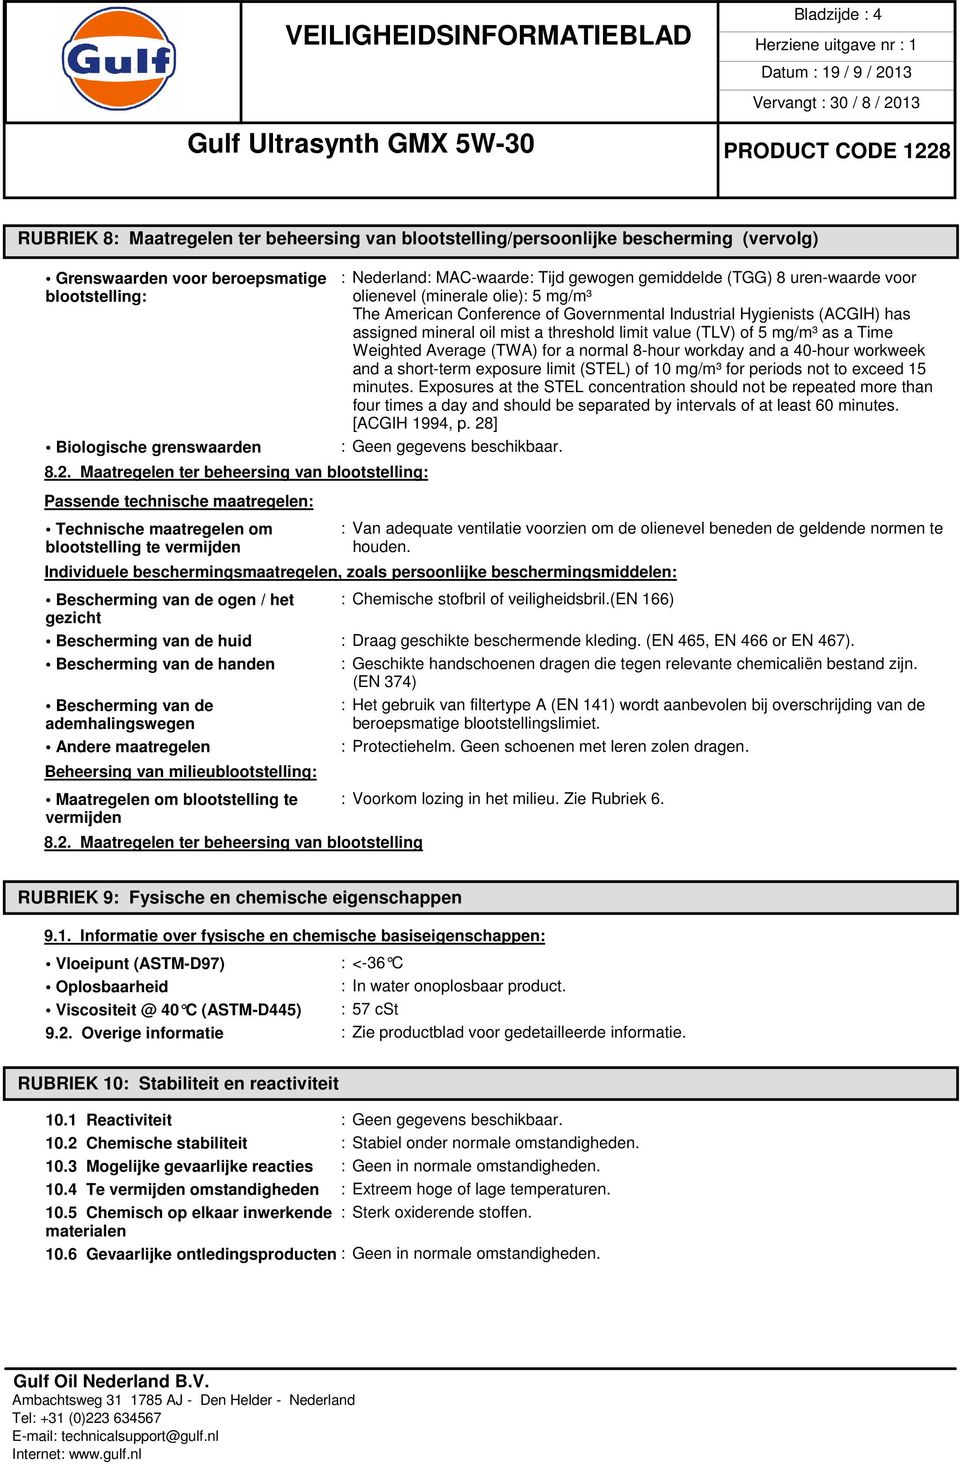 uren-waarde voor olienevel (minerale olie): 5 mg/m³ The American Conference of Governmental Industrial Hygienists (ACGIH) has assigned mineral oil mist a threshold limit value (TLV) of 5 mg/m³ as a